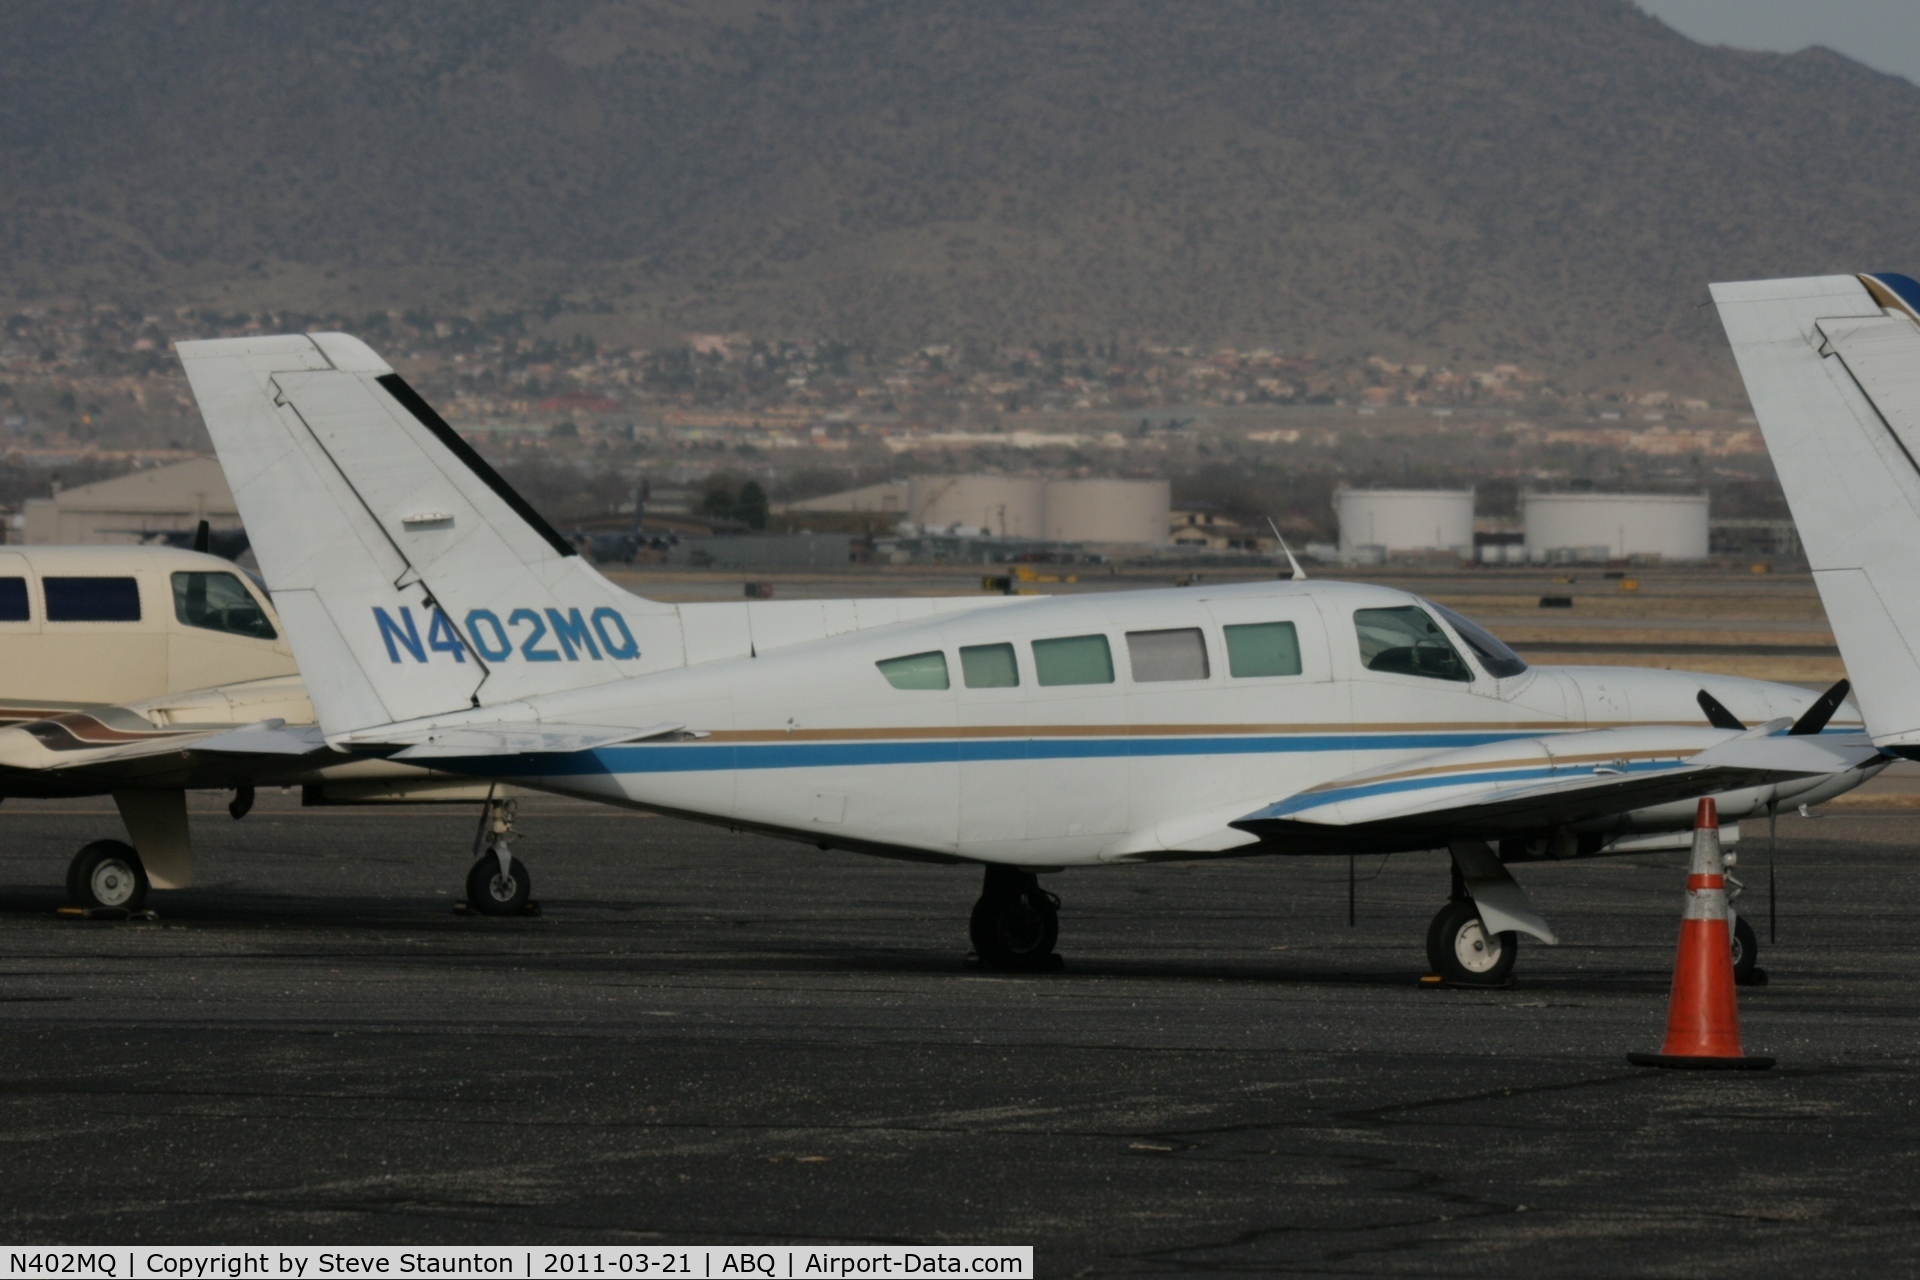 N402MQ, 1979 Cessna 402C C/N 402C0095, Taken at Alburquerque International Sunport Airport, New Mexico in March 2011 whilst on an Aeroprint Aviation tour